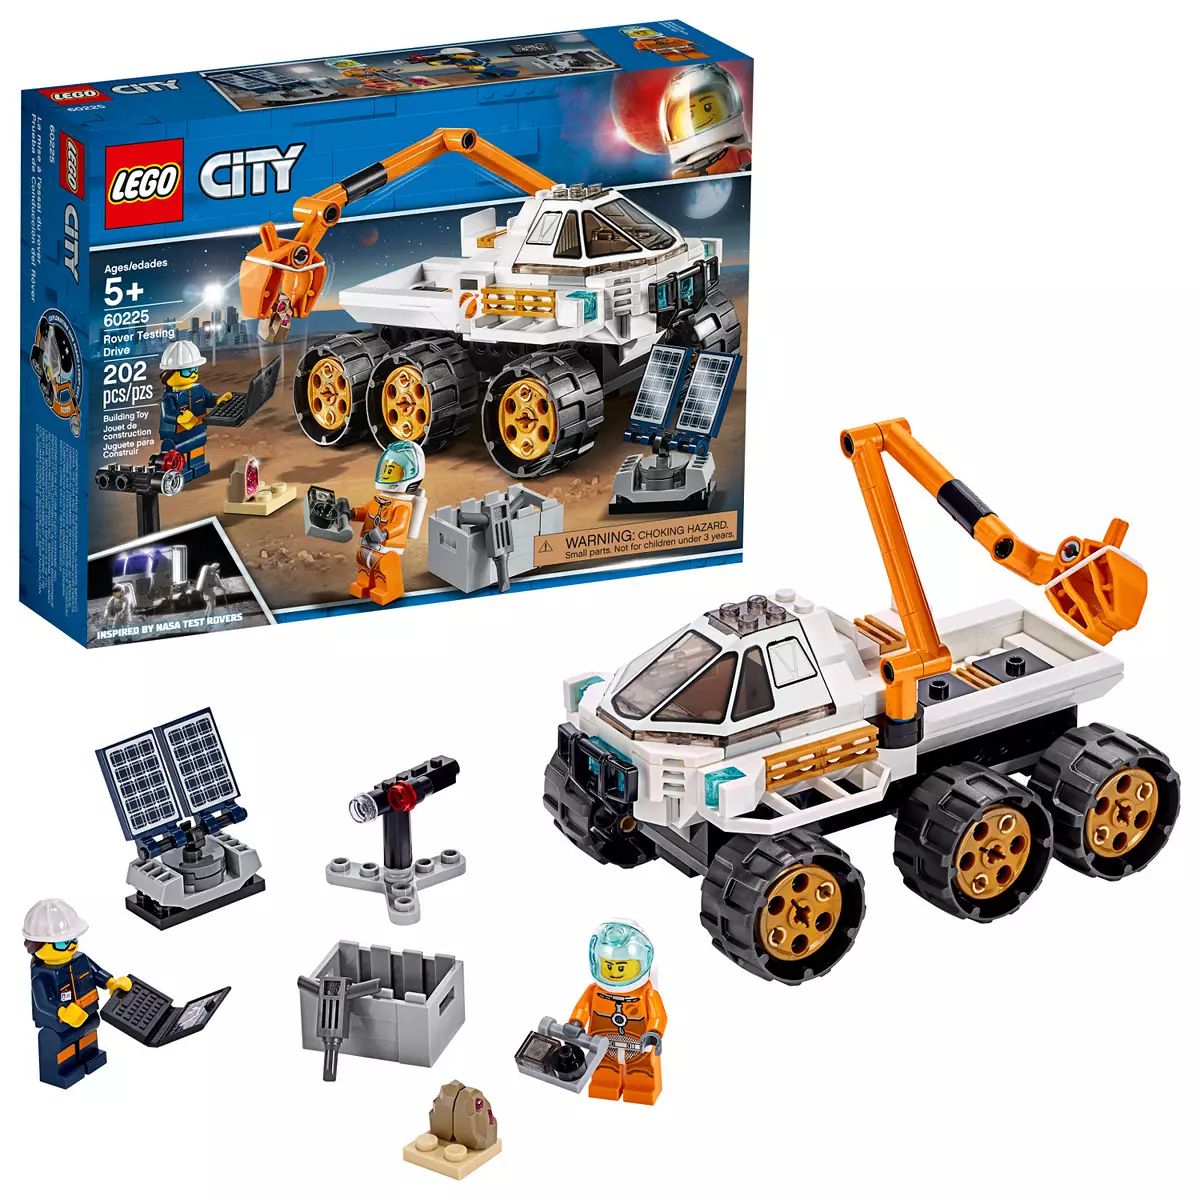 LEGO City Space Port Rover Testing Drive Set 60225 | Kohl's